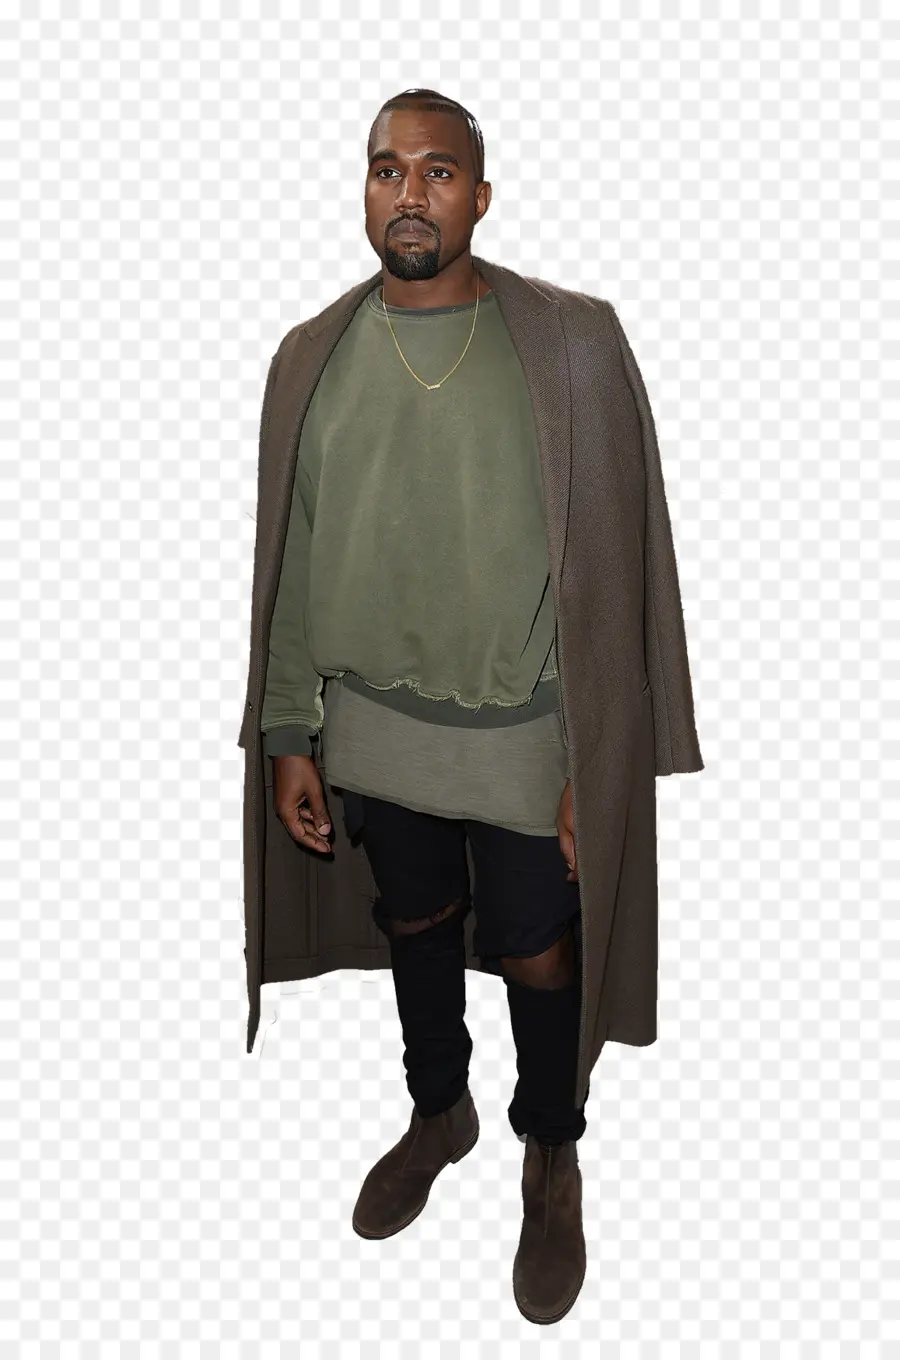 Kanye West，Iconos De Equipo PNG